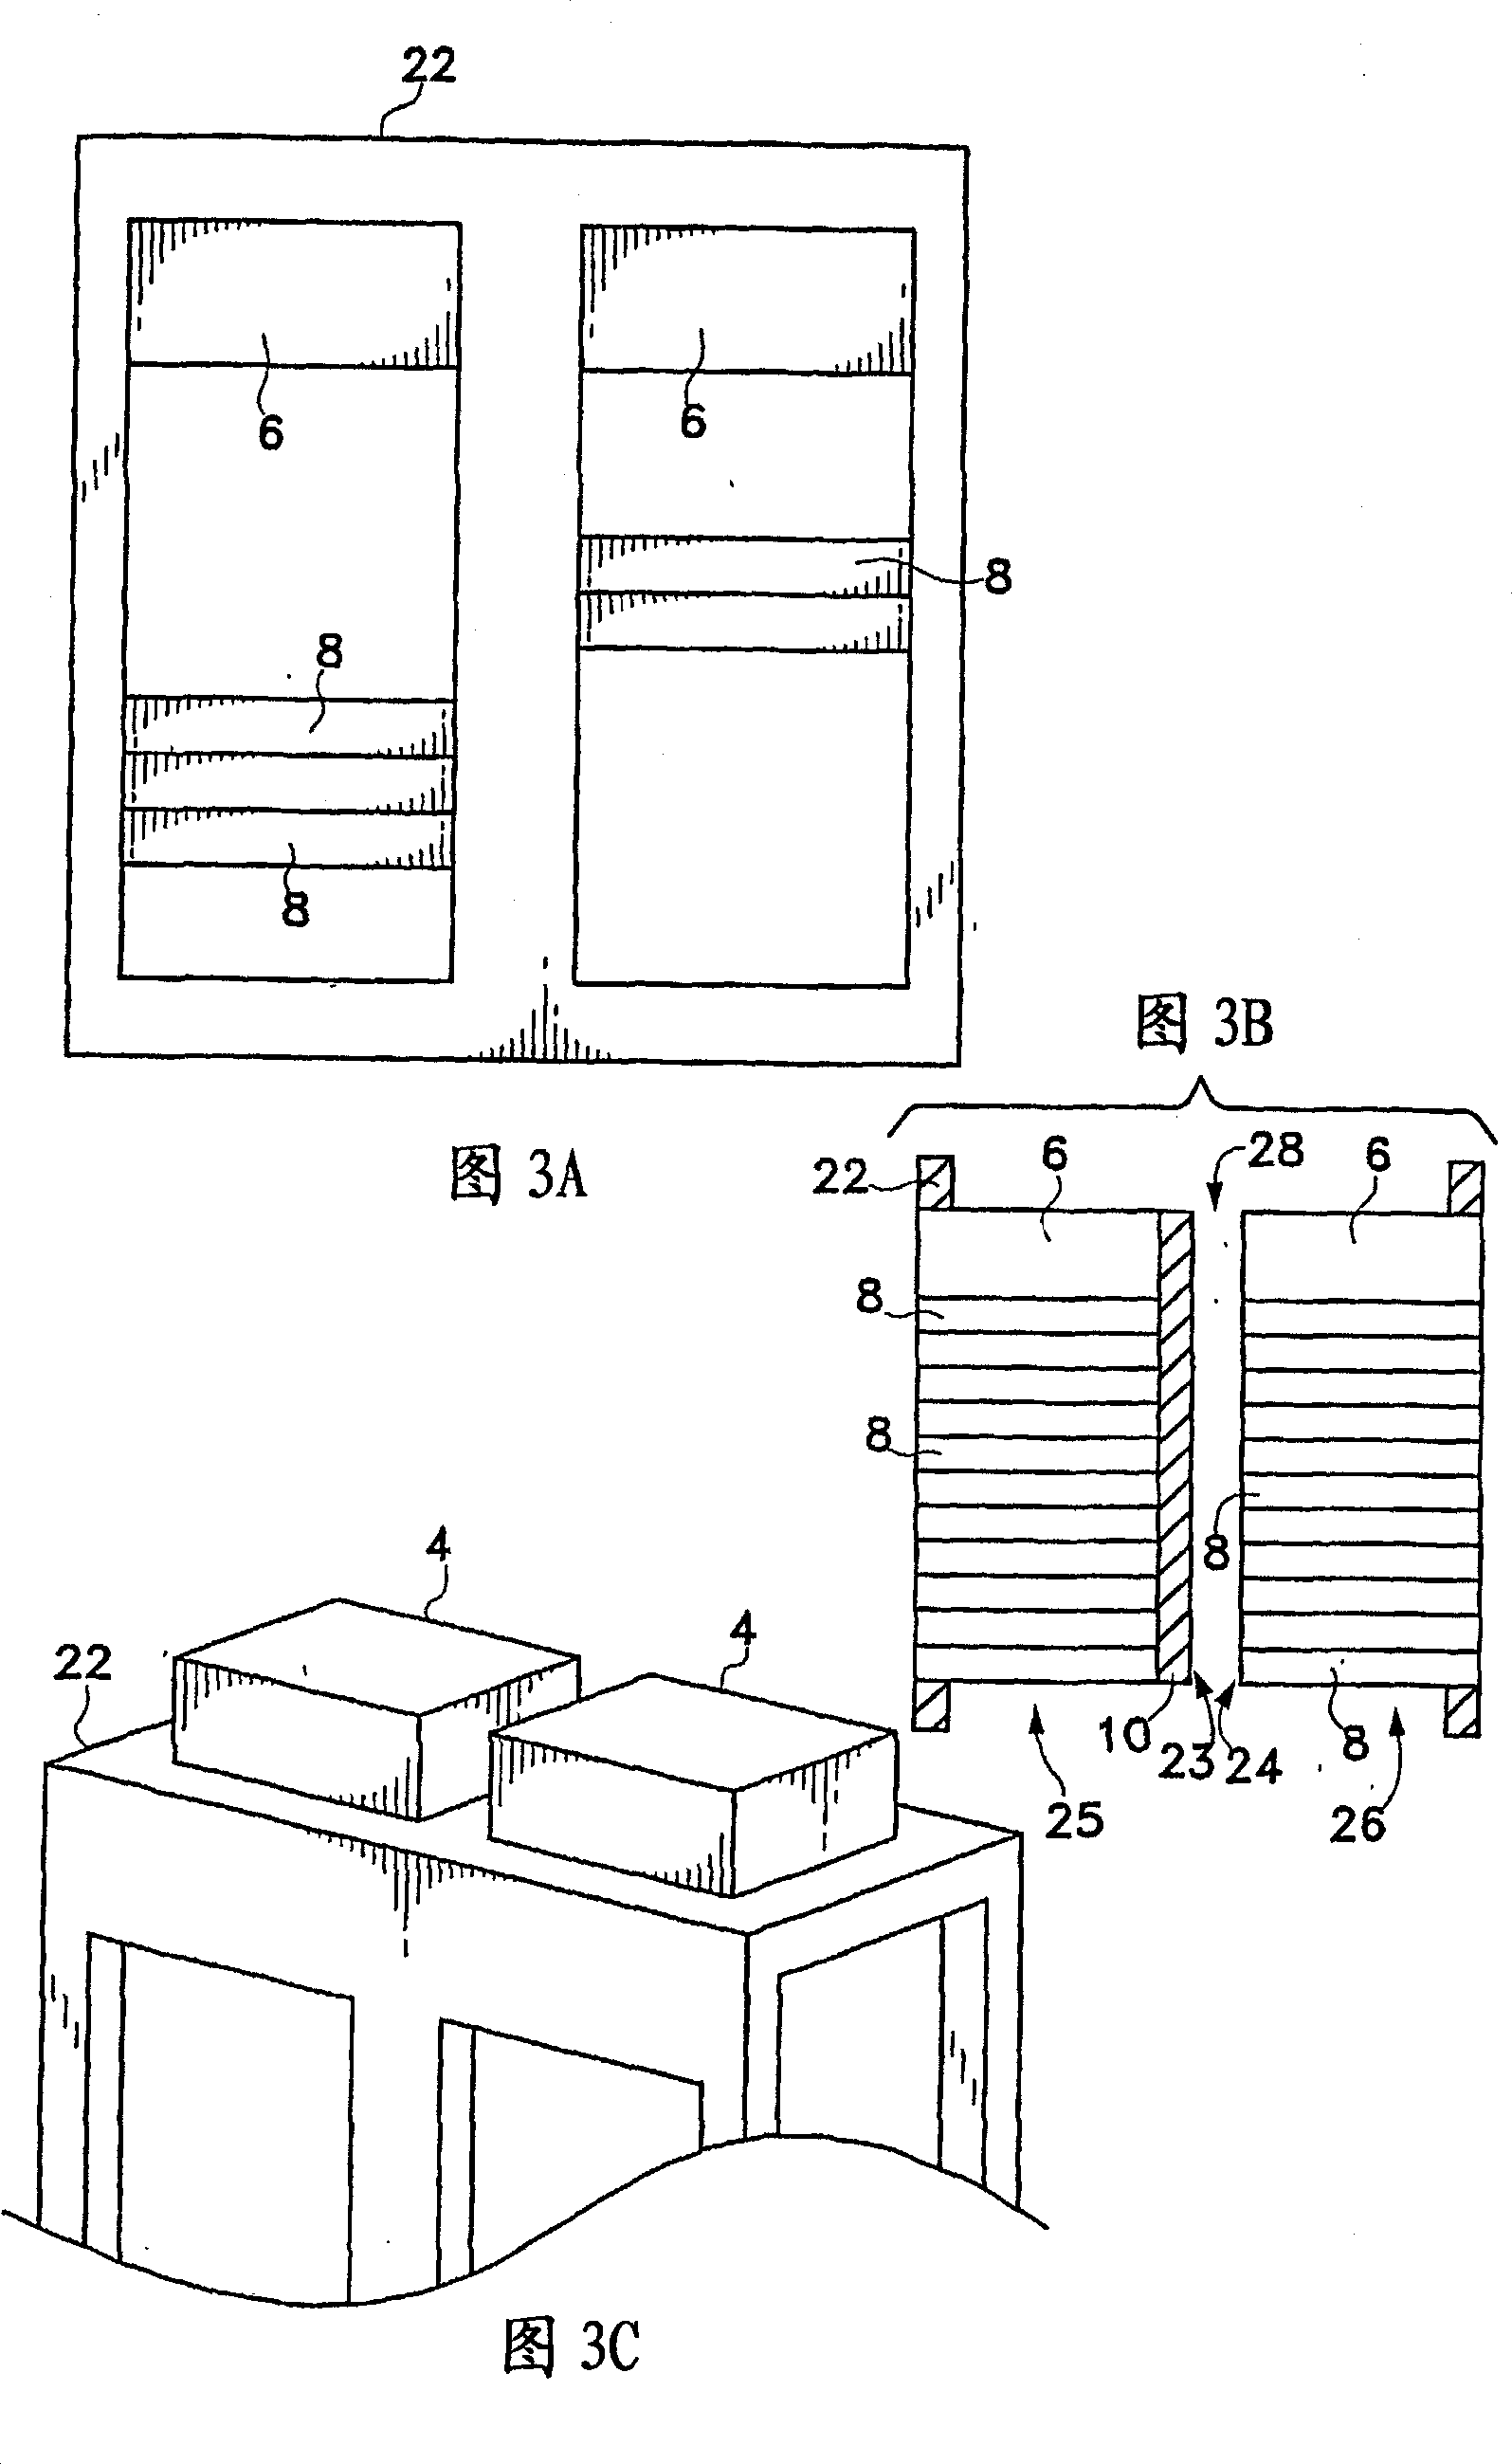 Computer rack with power distribution system